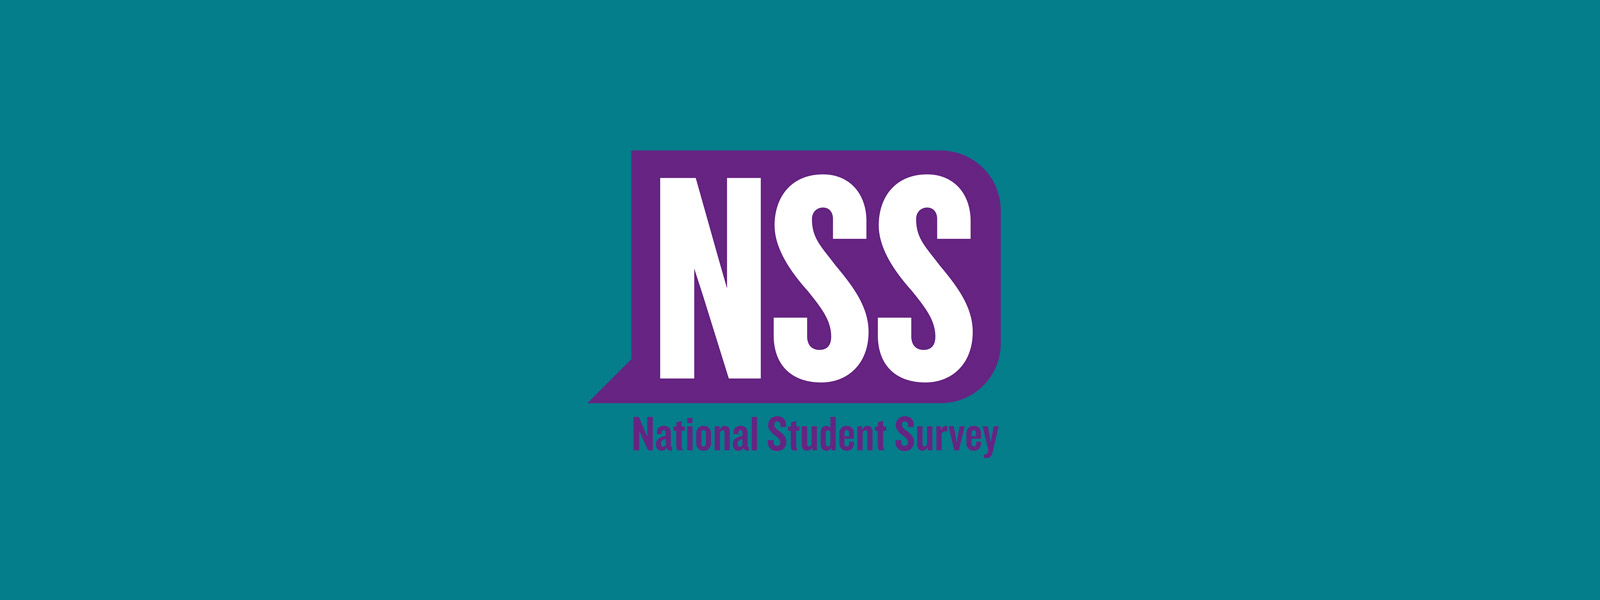 A purple NSS logo on a teal background